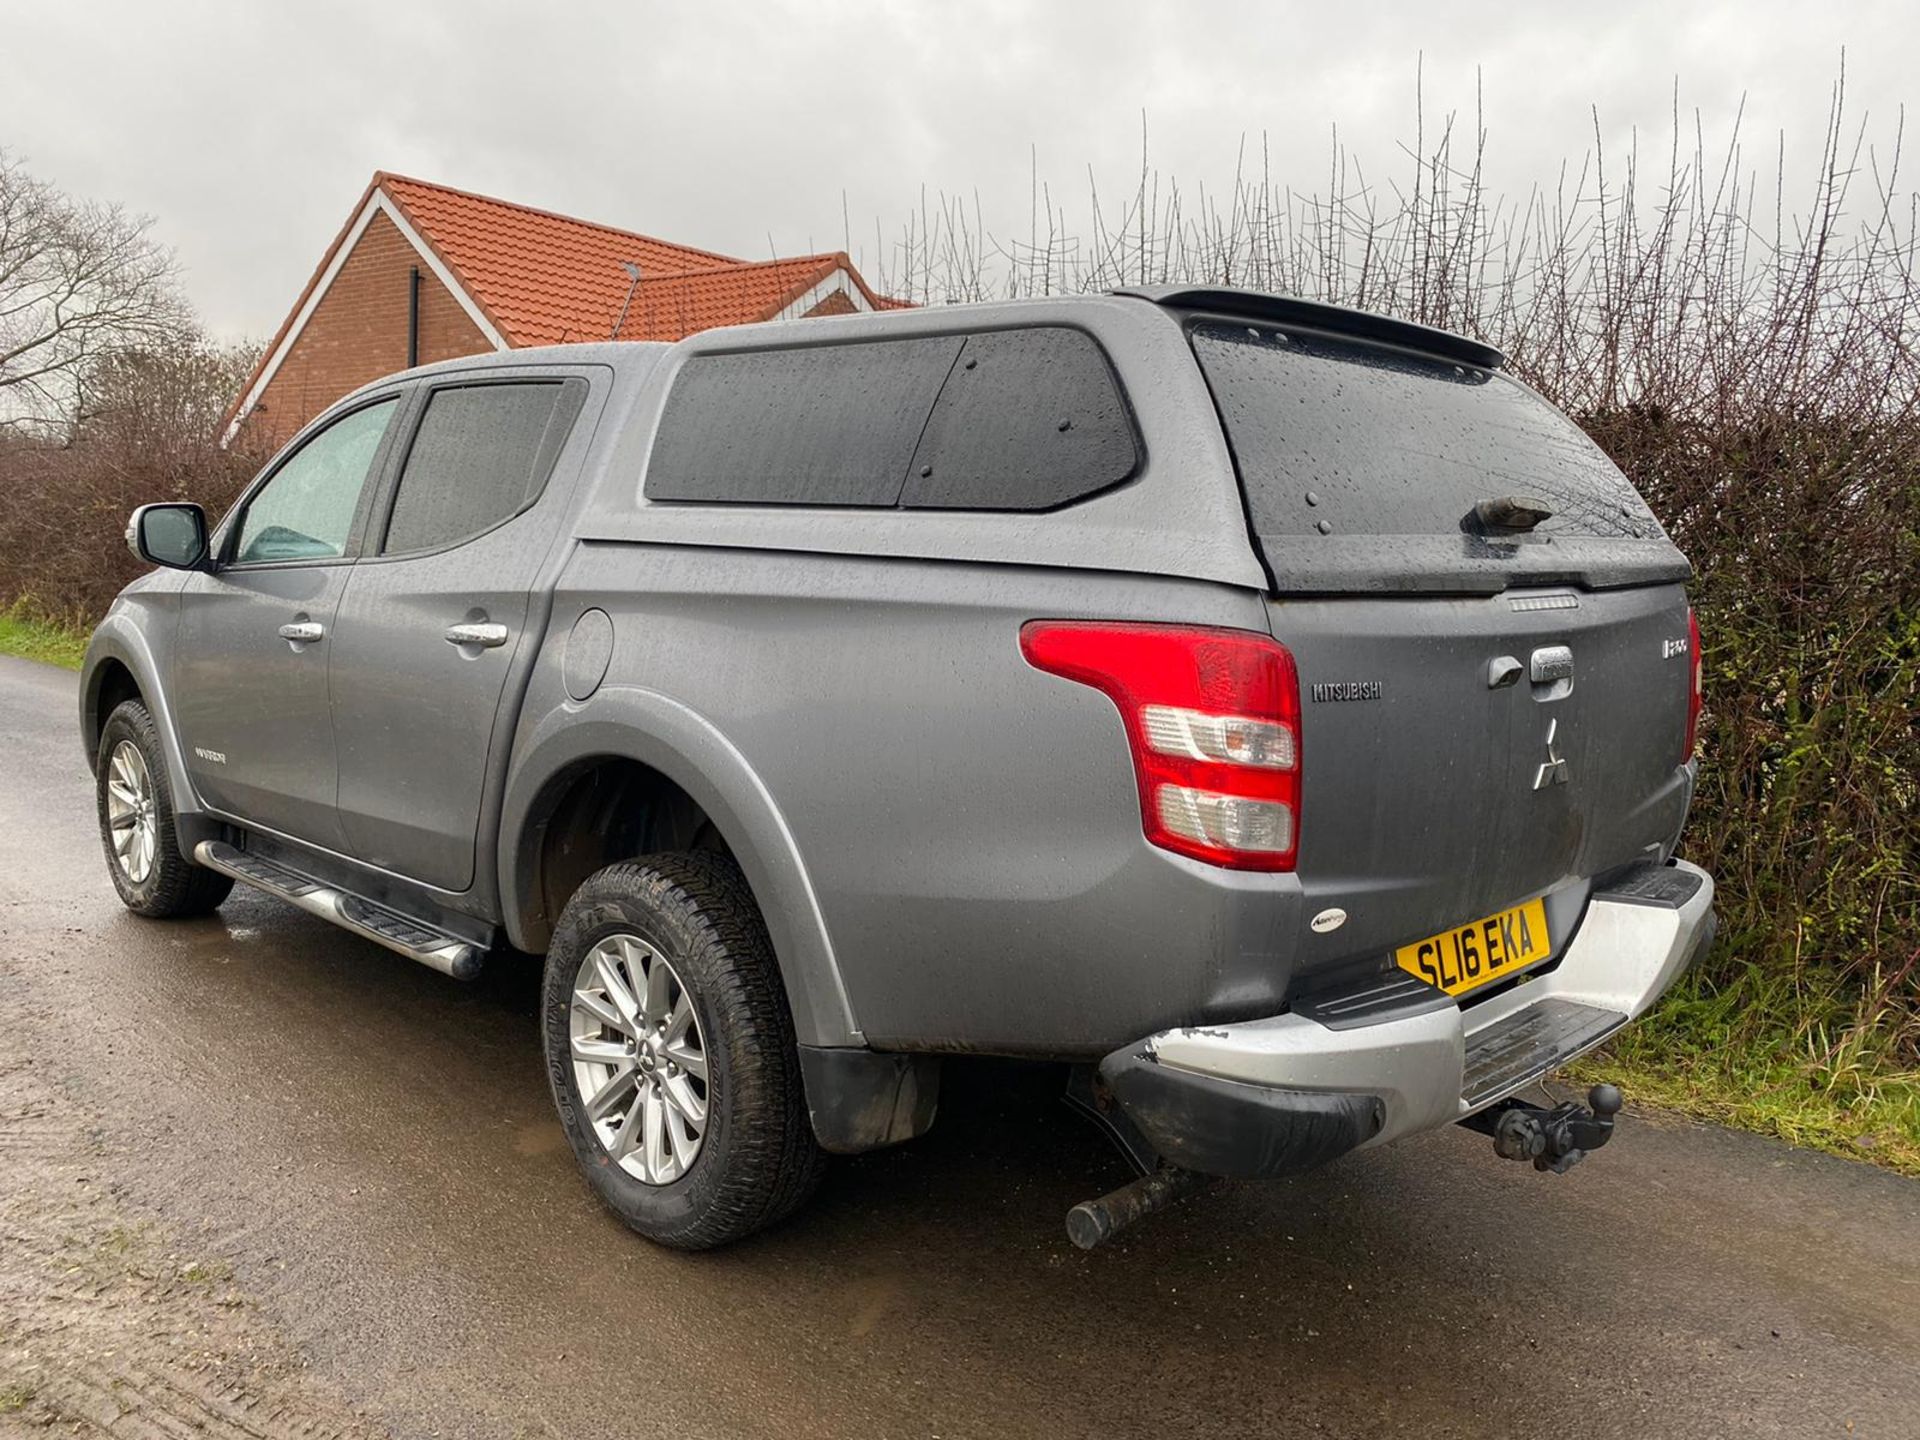 2016/16 REG MITSUBISHI L200 WARRIOR DOUBLE CAB DI-D 2.5 DIESEL PICK-UP, SHOWING 0 FORMER KEEPERS - Image 3 of 8